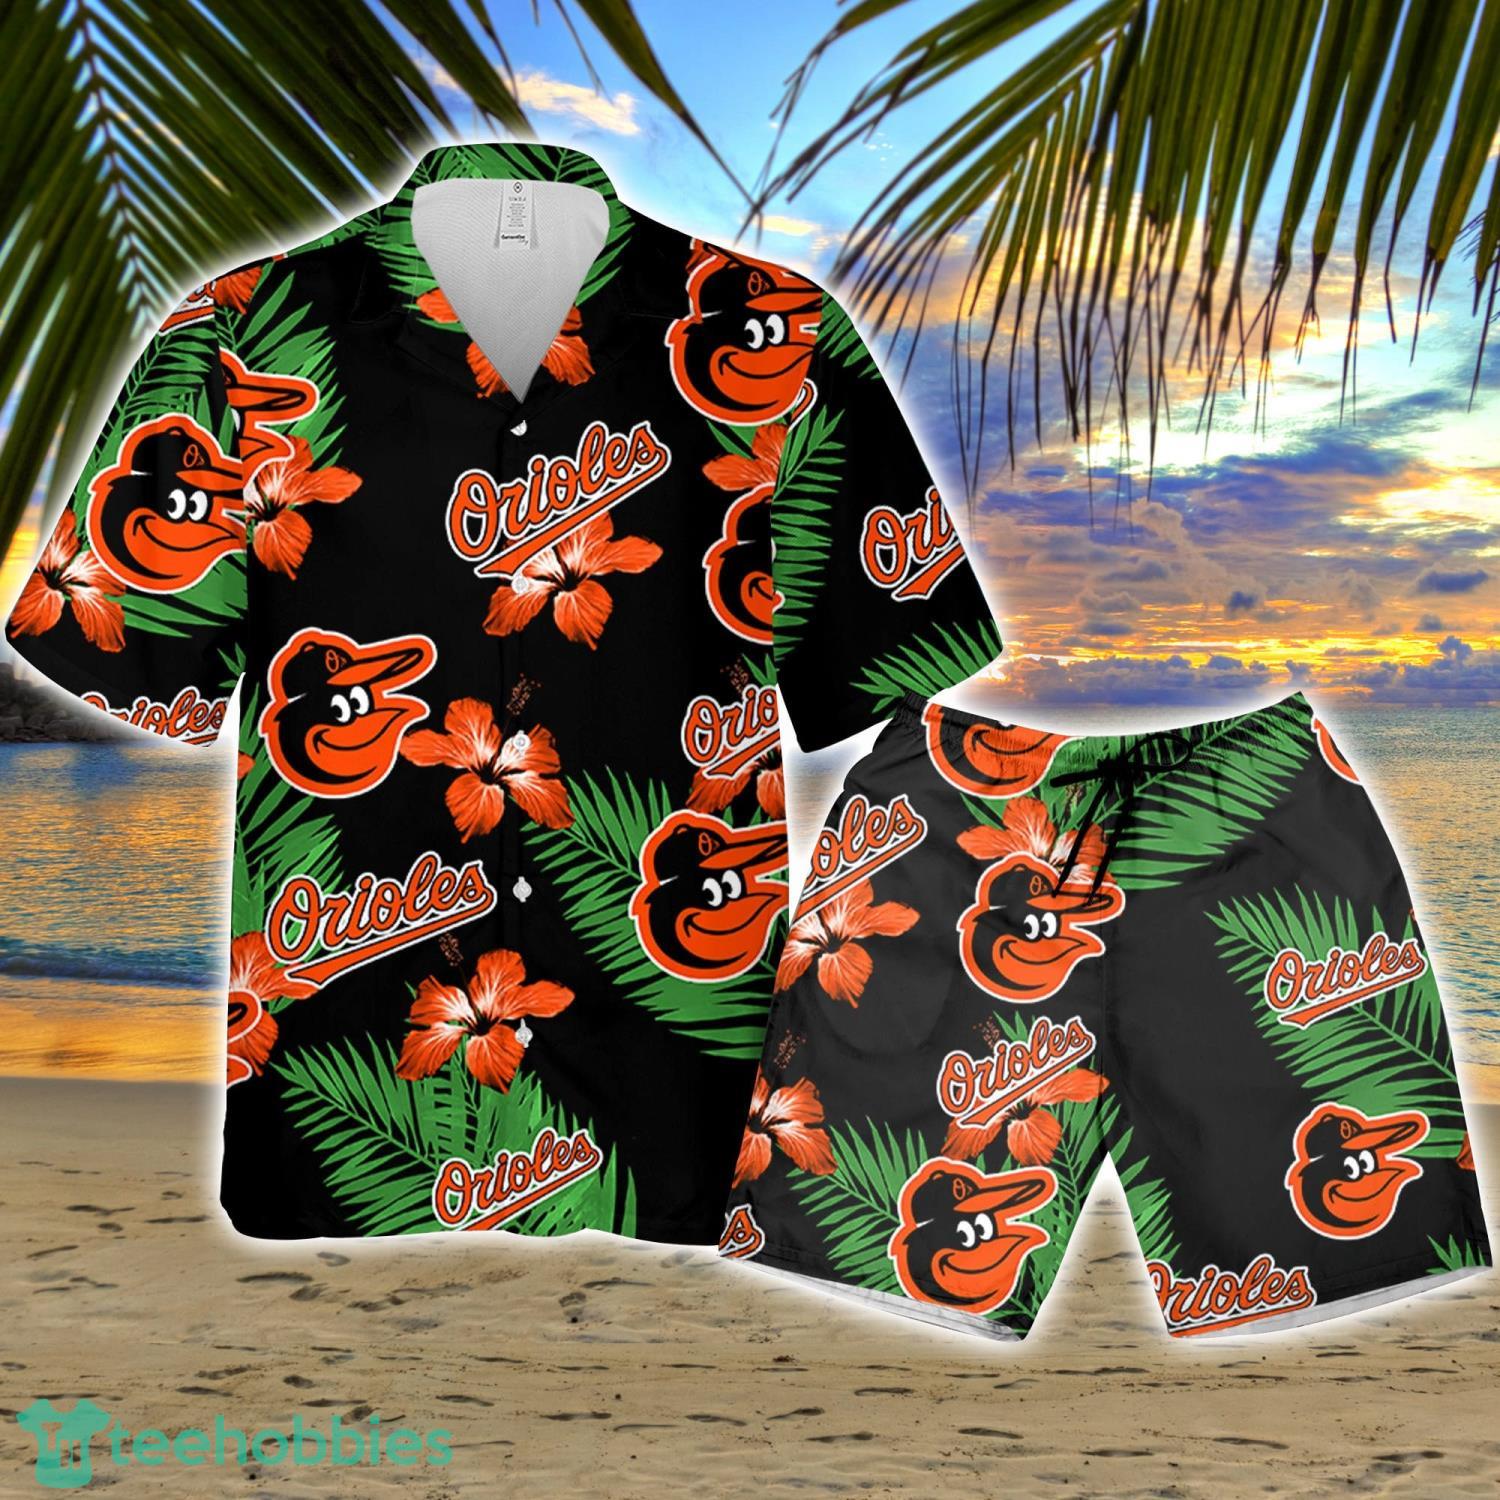 Baltimore Orioles Green Leaf Pattern Tropical Hawaiian Shirt For Men And  Women - Freedomdesign